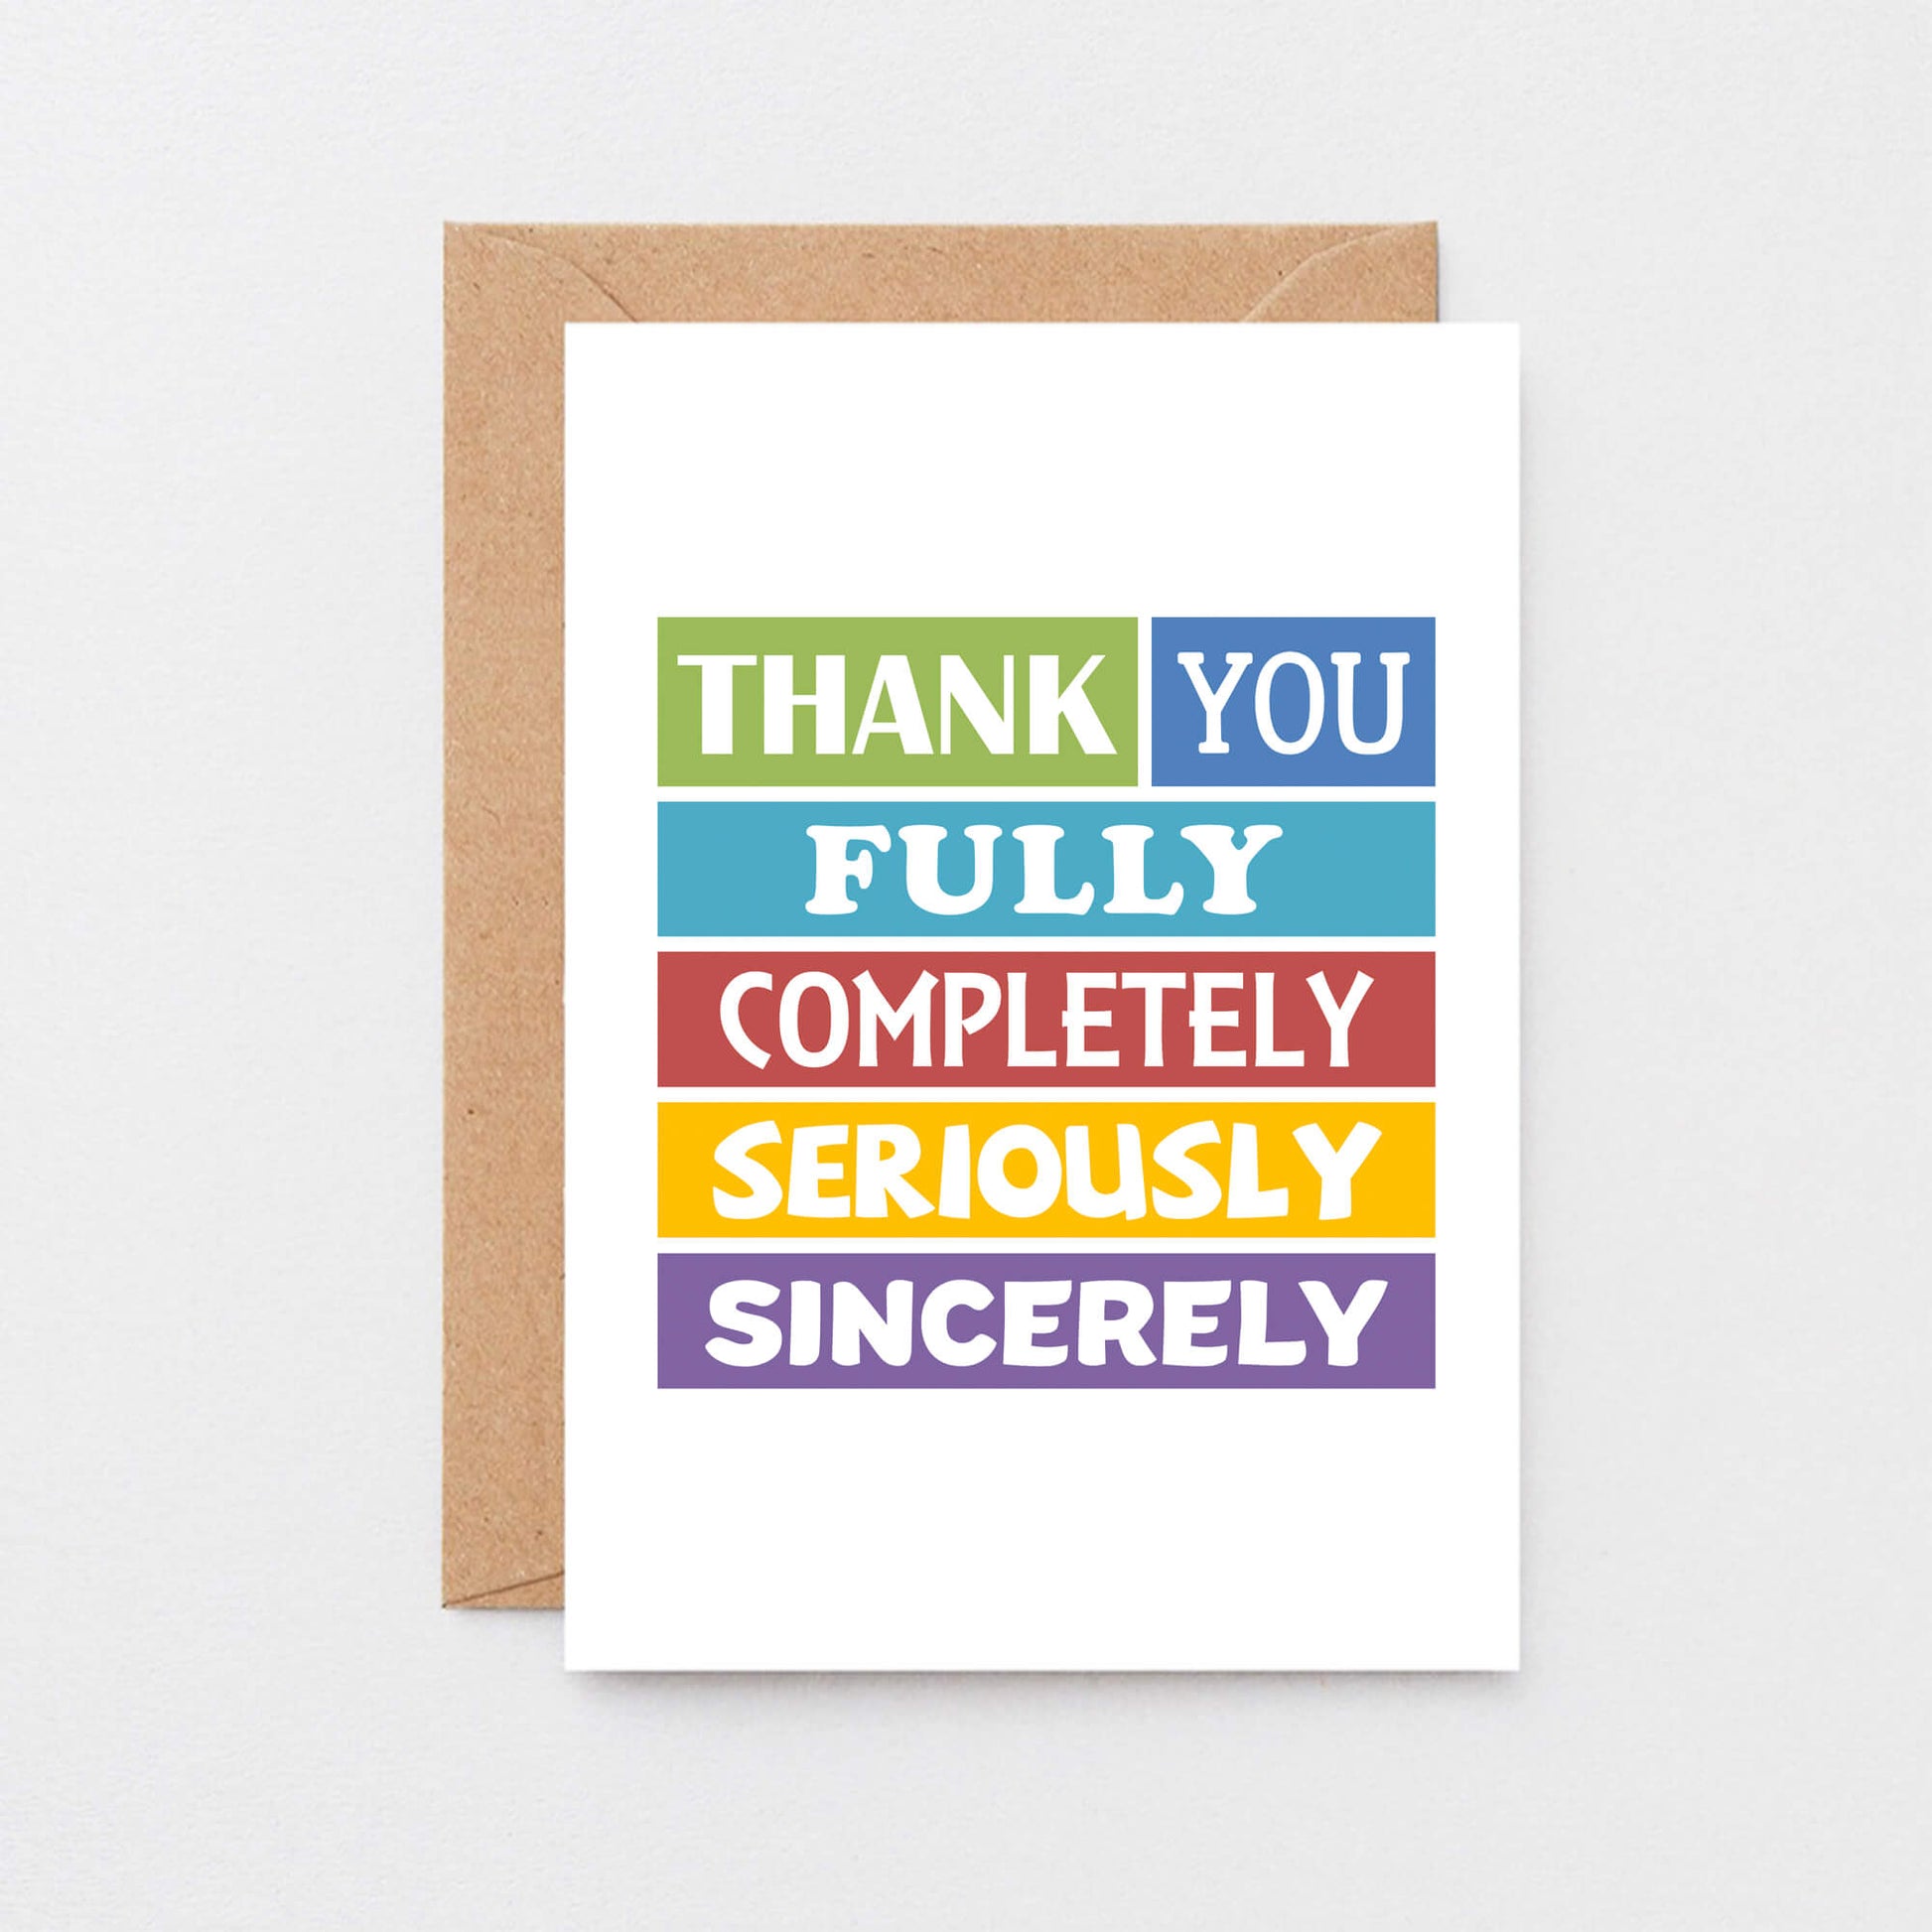 Thank You Card by SixElevenCreations. Reads Thank you fully completely seriously sincerely. Product Code SE0079A6